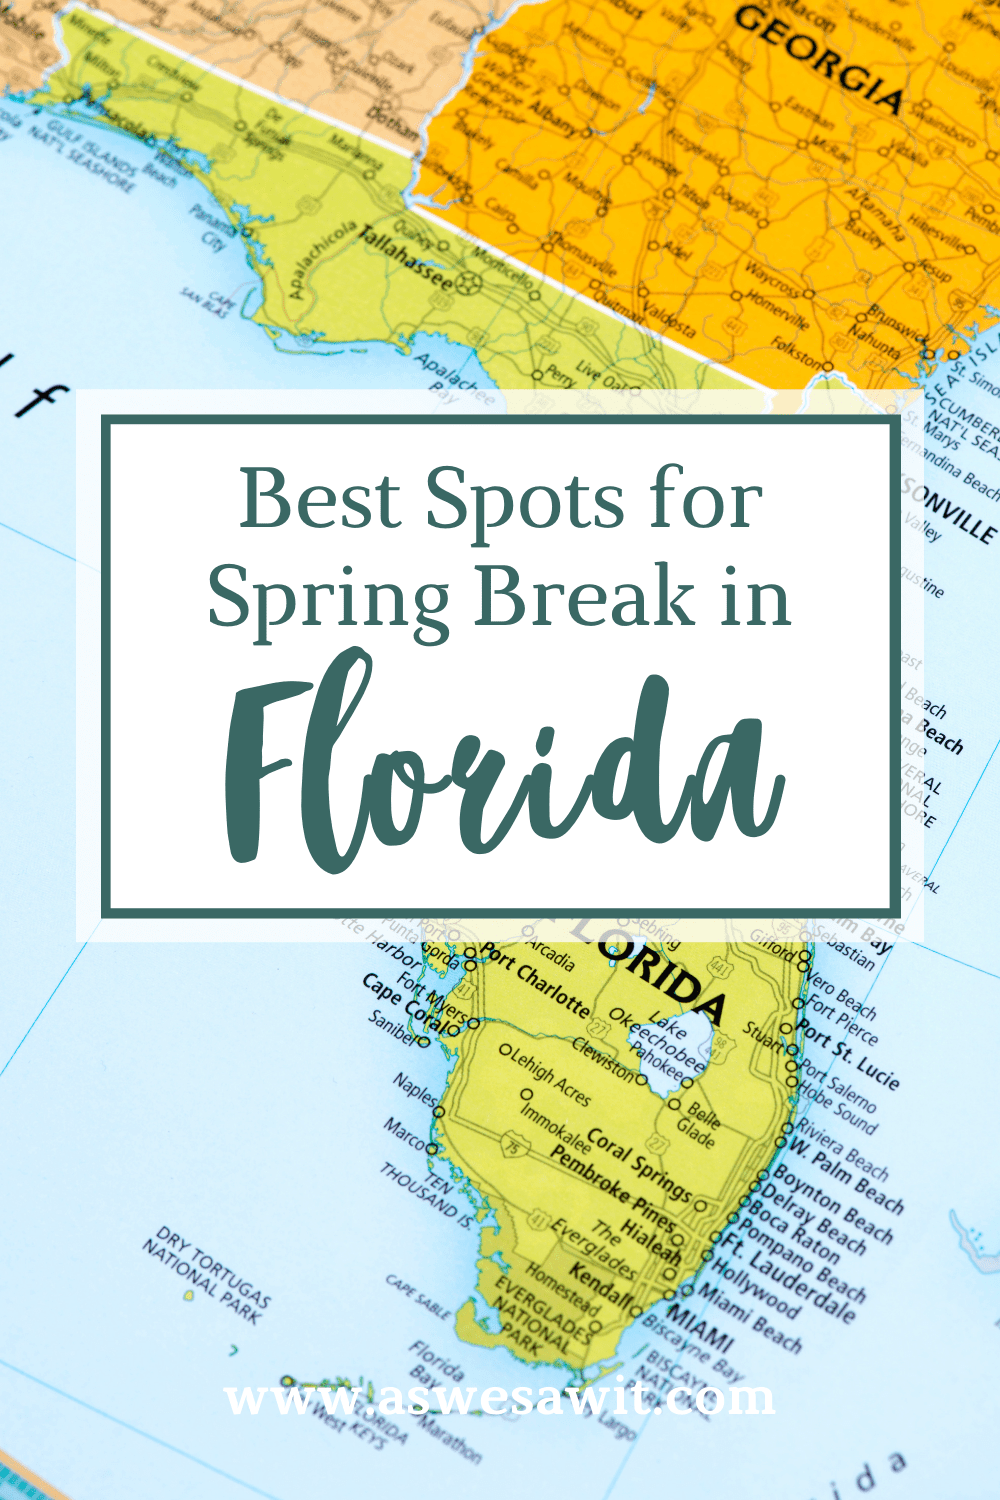 Map of florida. Text overlay says "Best spots for spring break in Florida"